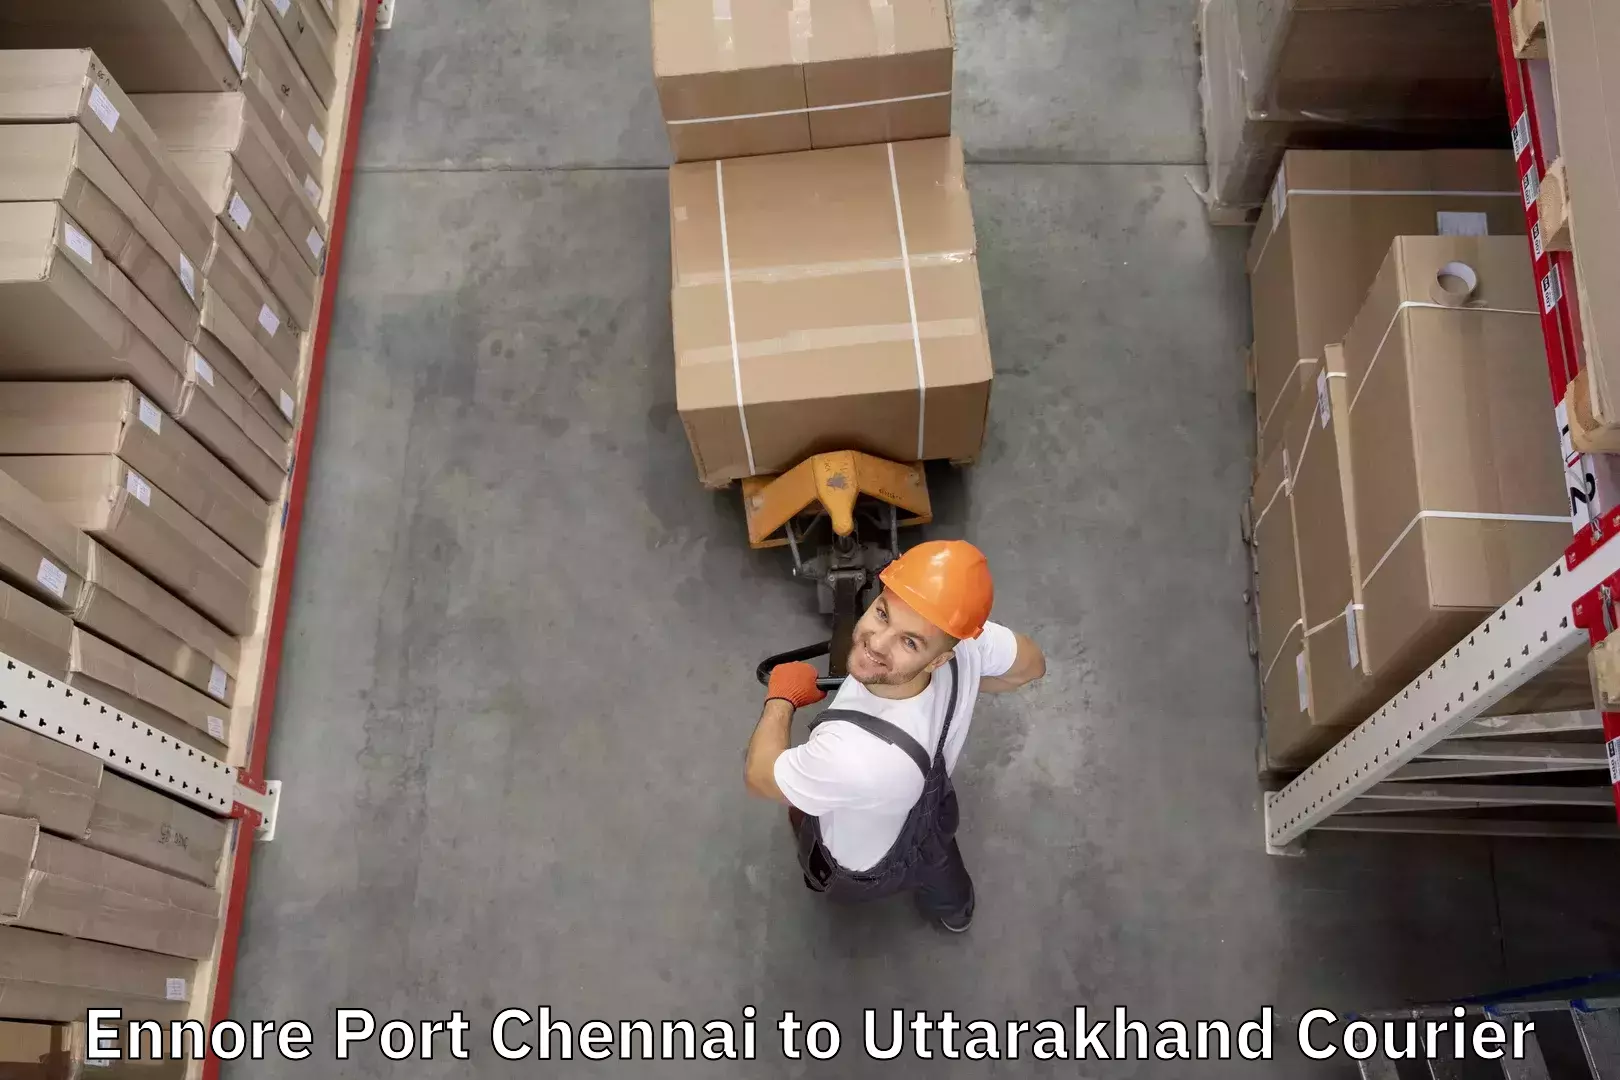 Baggage relocation service Ennore Port Chennai to IIT Roorkee